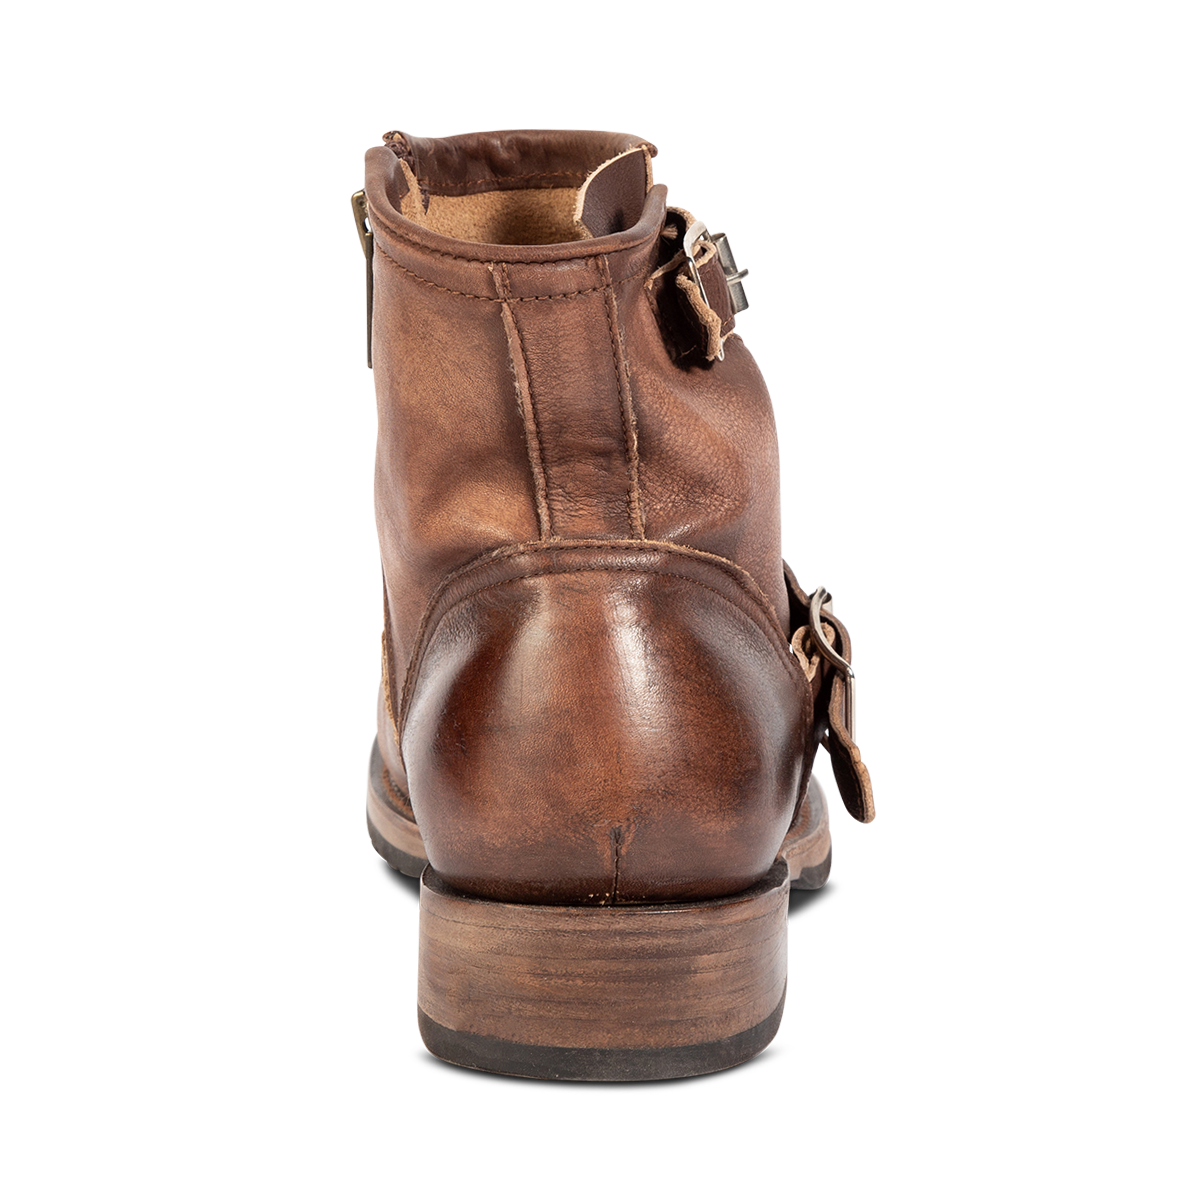 Back view showing low heel and buckle strap detail on FREEBIRD men's Railroad brown distressed ankle boot